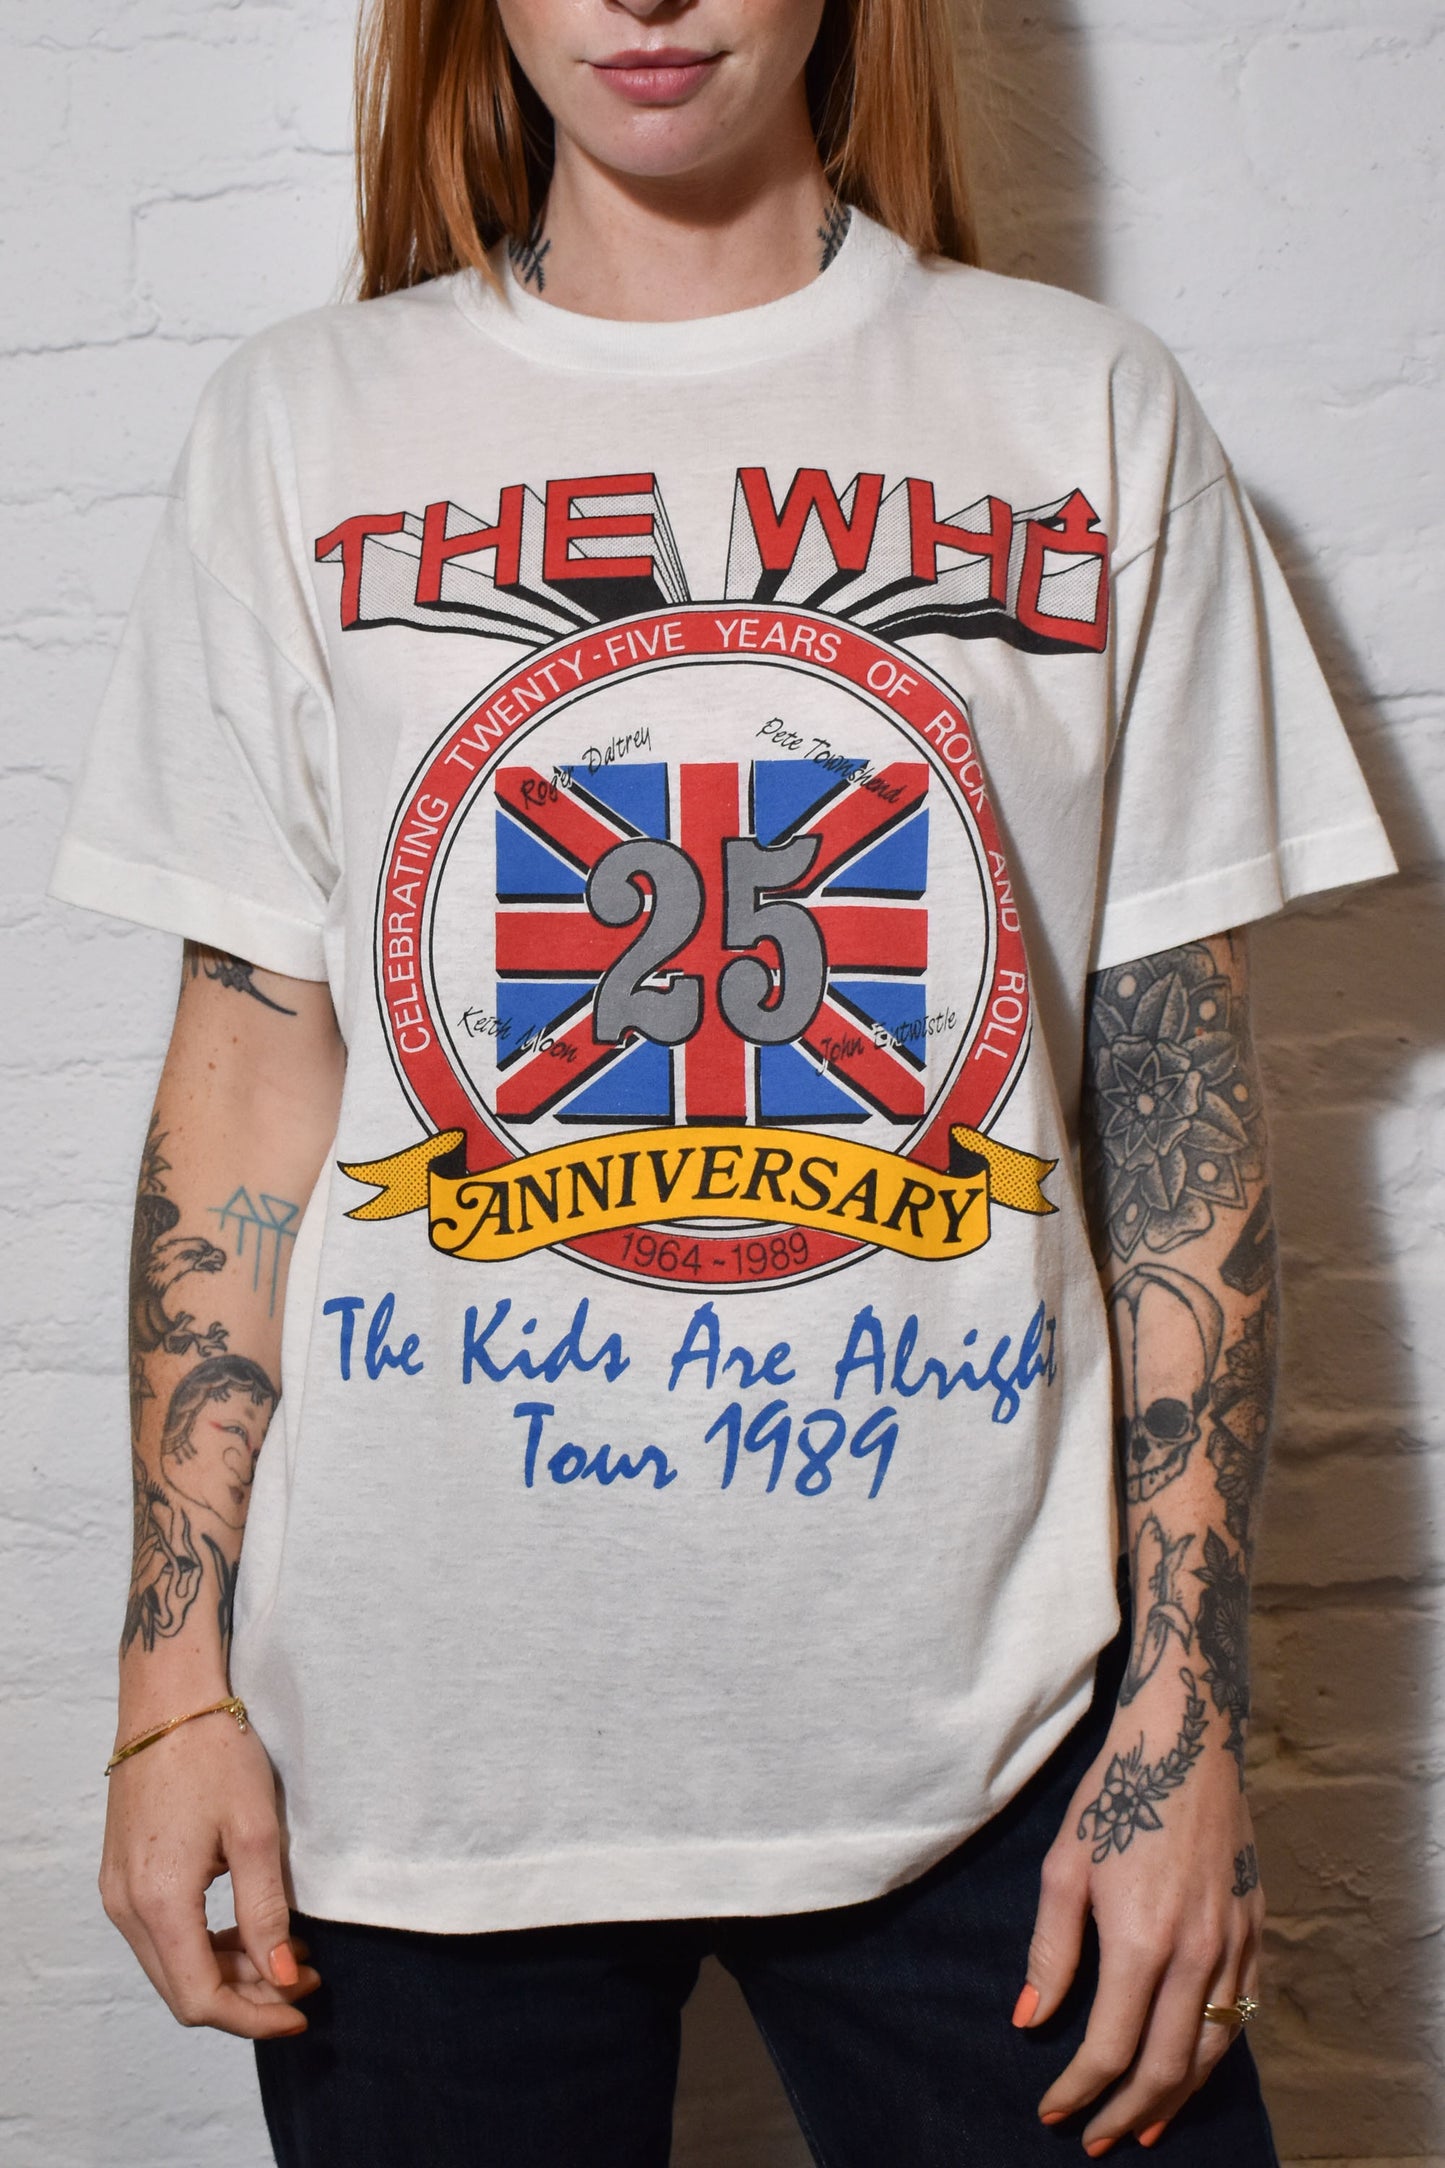 Vintage 1989 "The Who" The Kids Are Alright Tour T-shirt